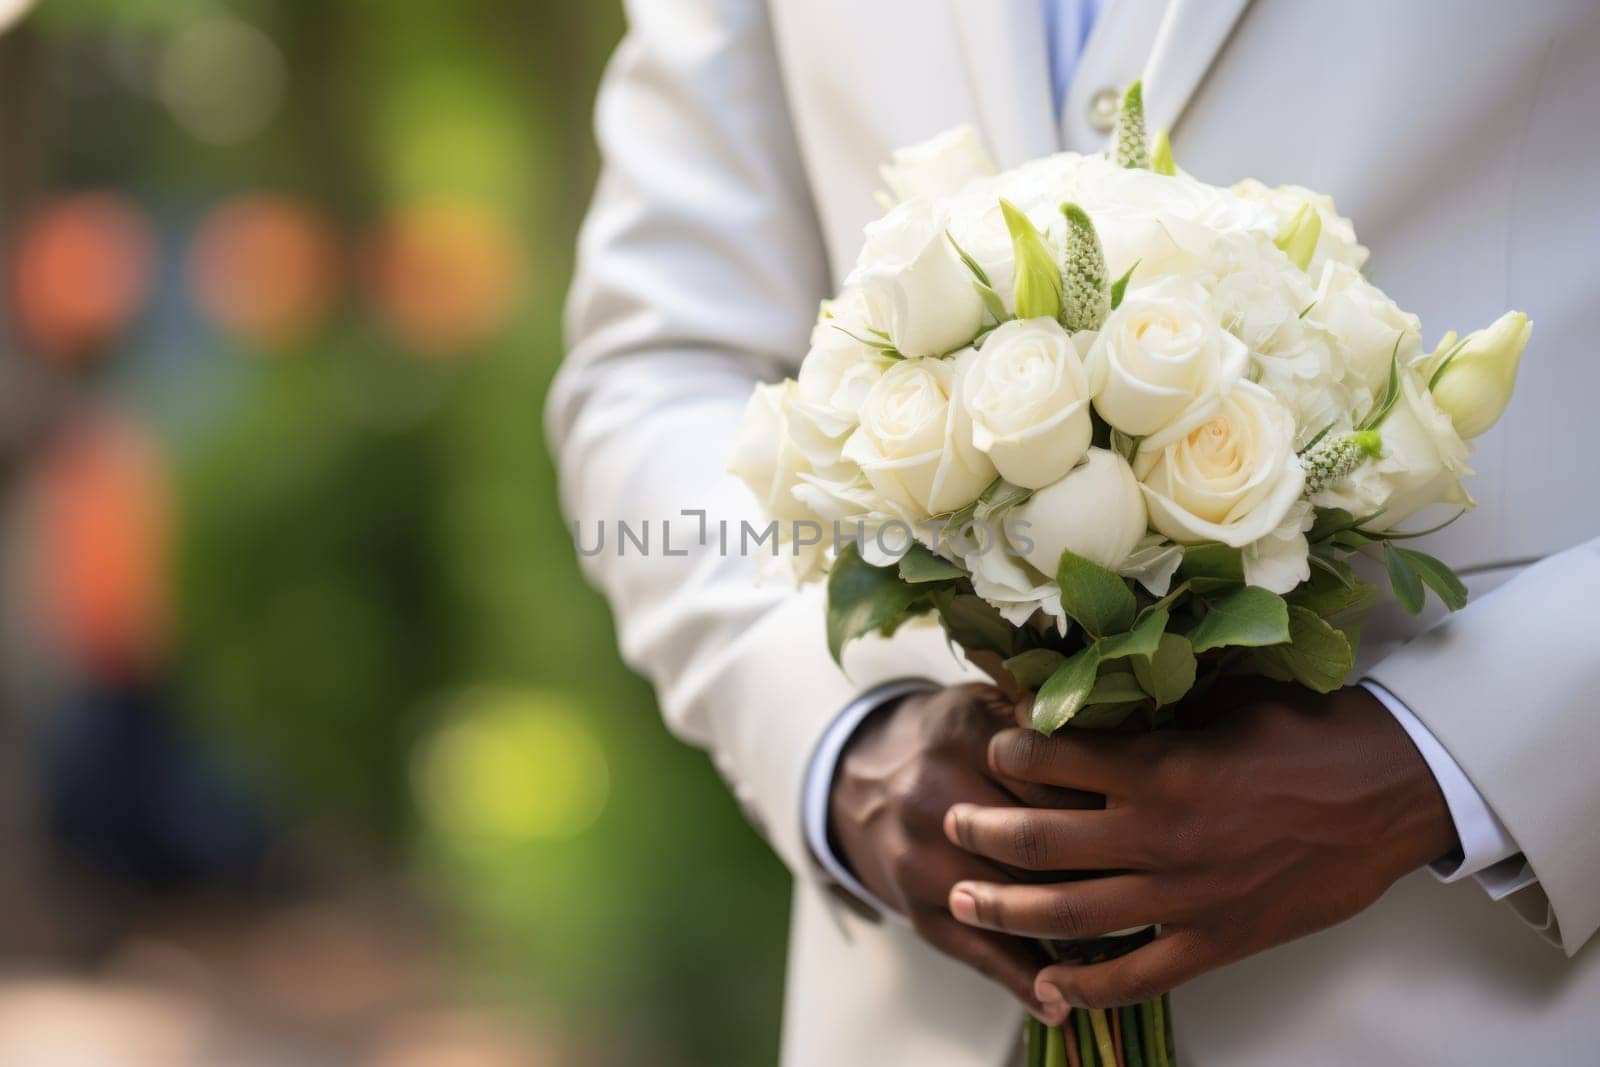 A close up of a bride's or groom's hands holding a bouquet by nijieimu